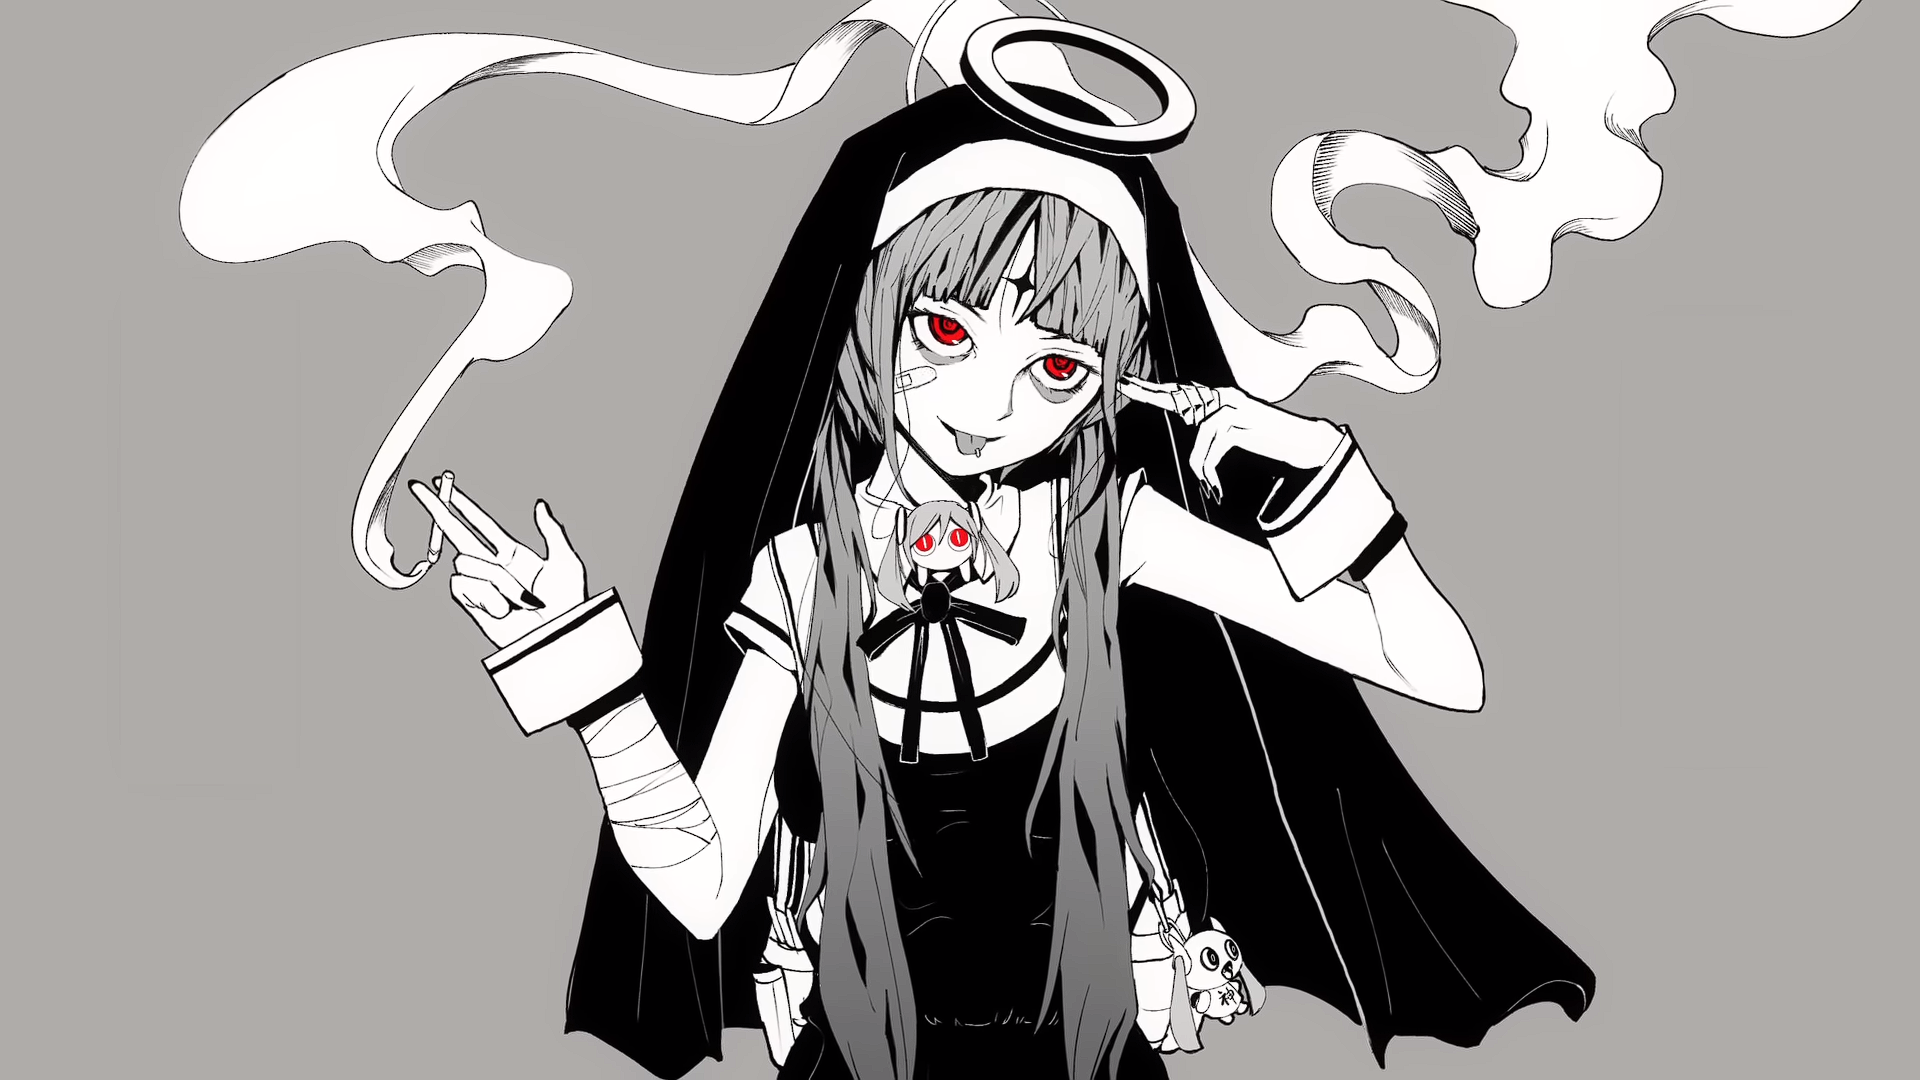 Anime 1920x1080 Hatsune Miku halo simple background dark minimalism tongue out pierced tongue Vocaloid anime girls smoke gray background nuns nun outfit cigarettes band-aid PinnochioP red eyes